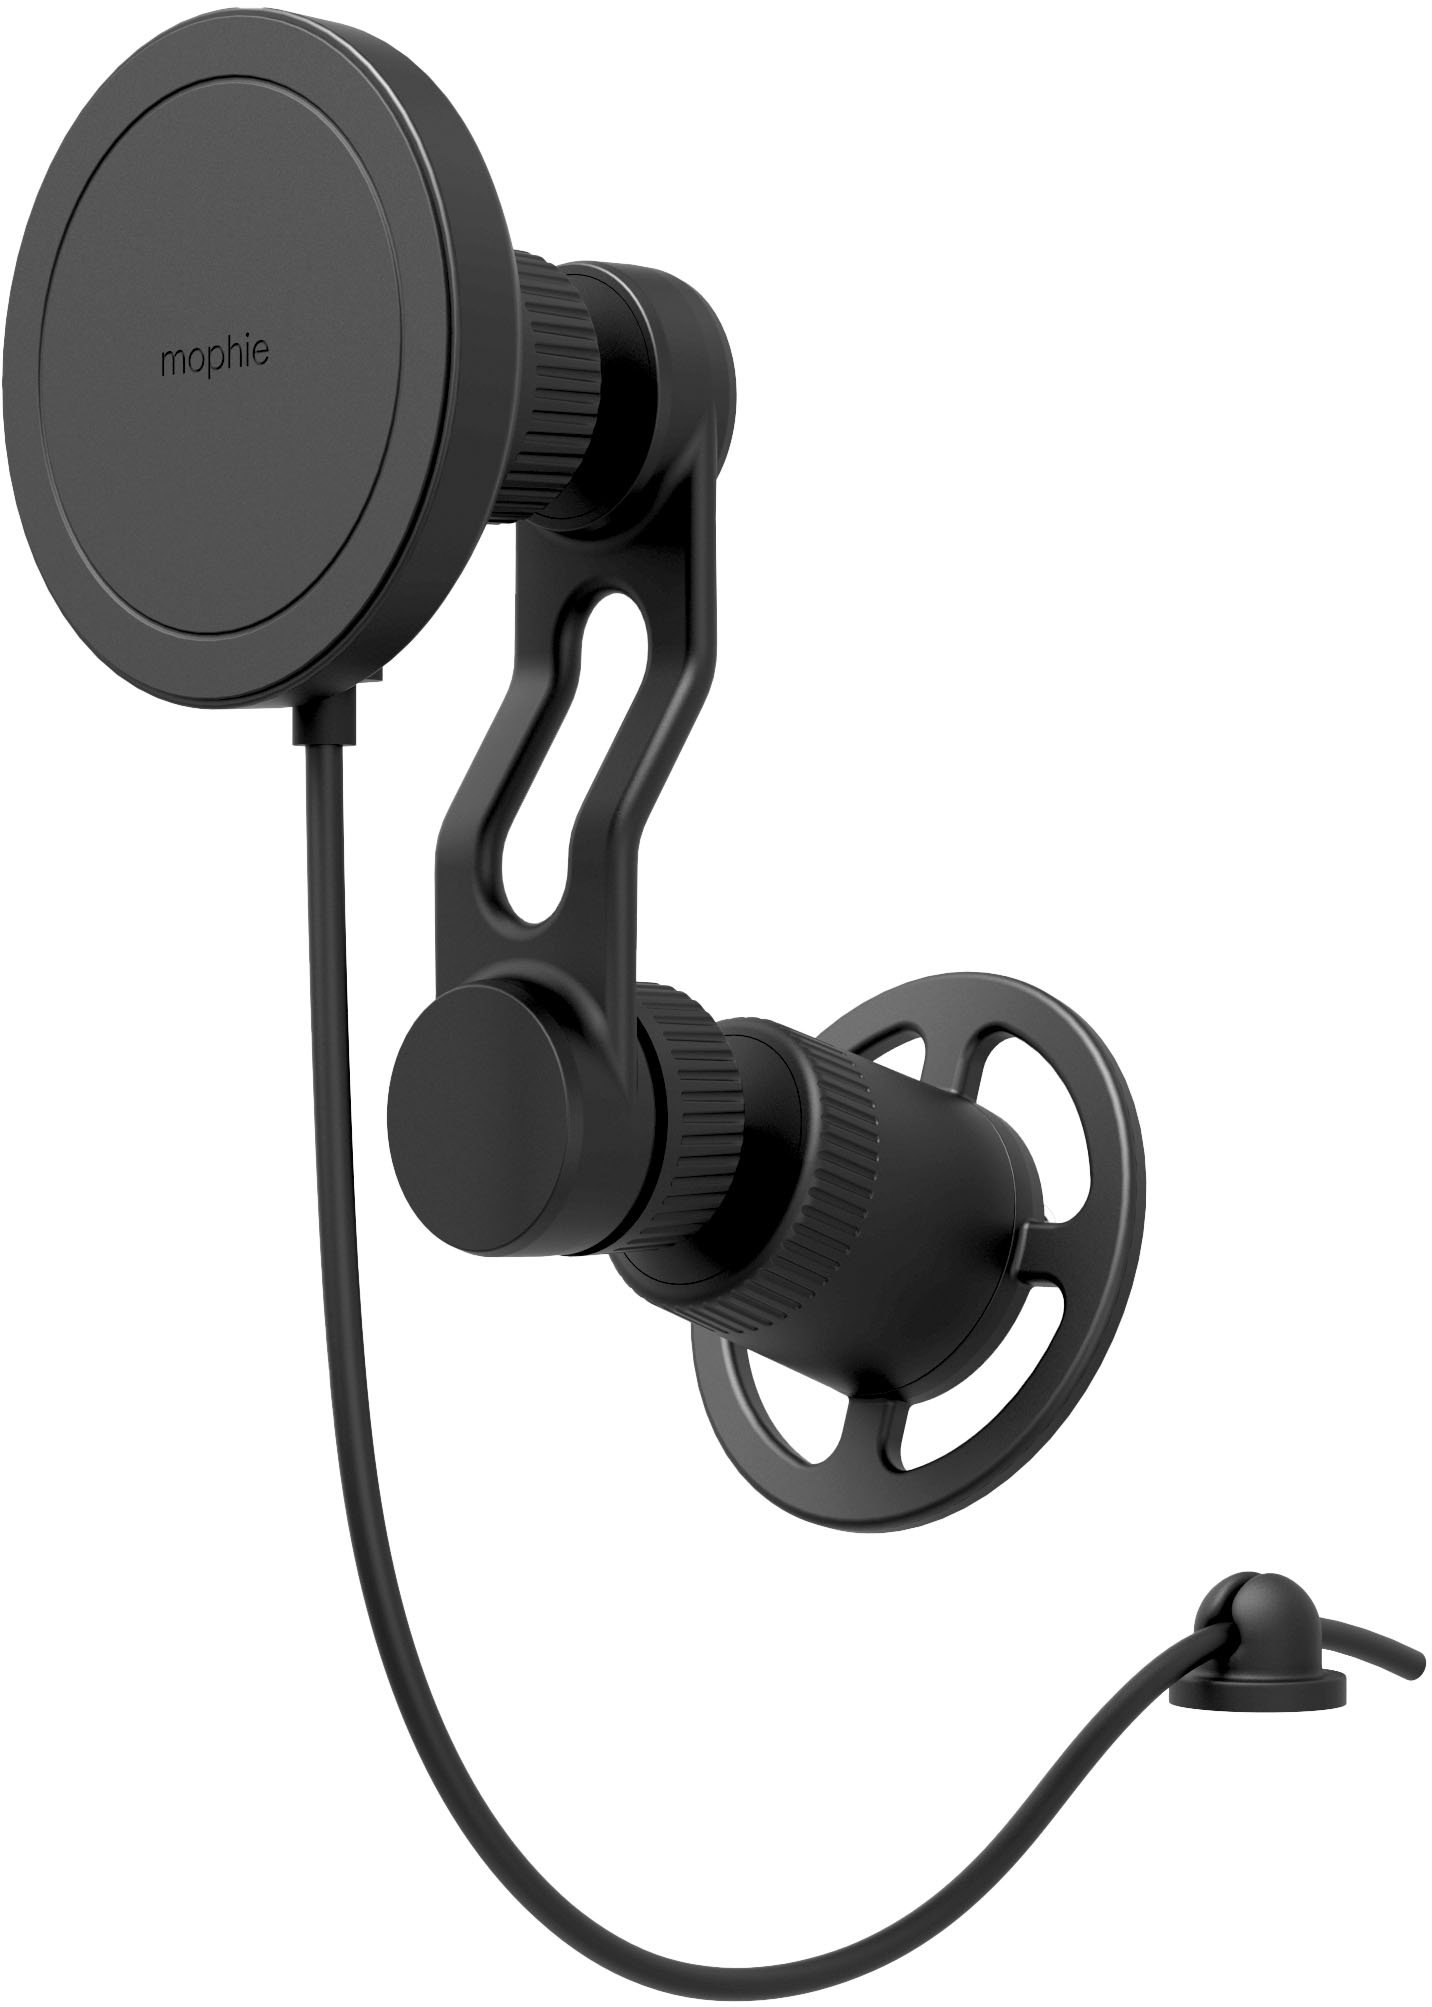 mophie snap+ Wireless Charging Vent Mount with Adjustable Arm for MagSafe  Compatible Mobile Devices Black 401311343 - Best Buy